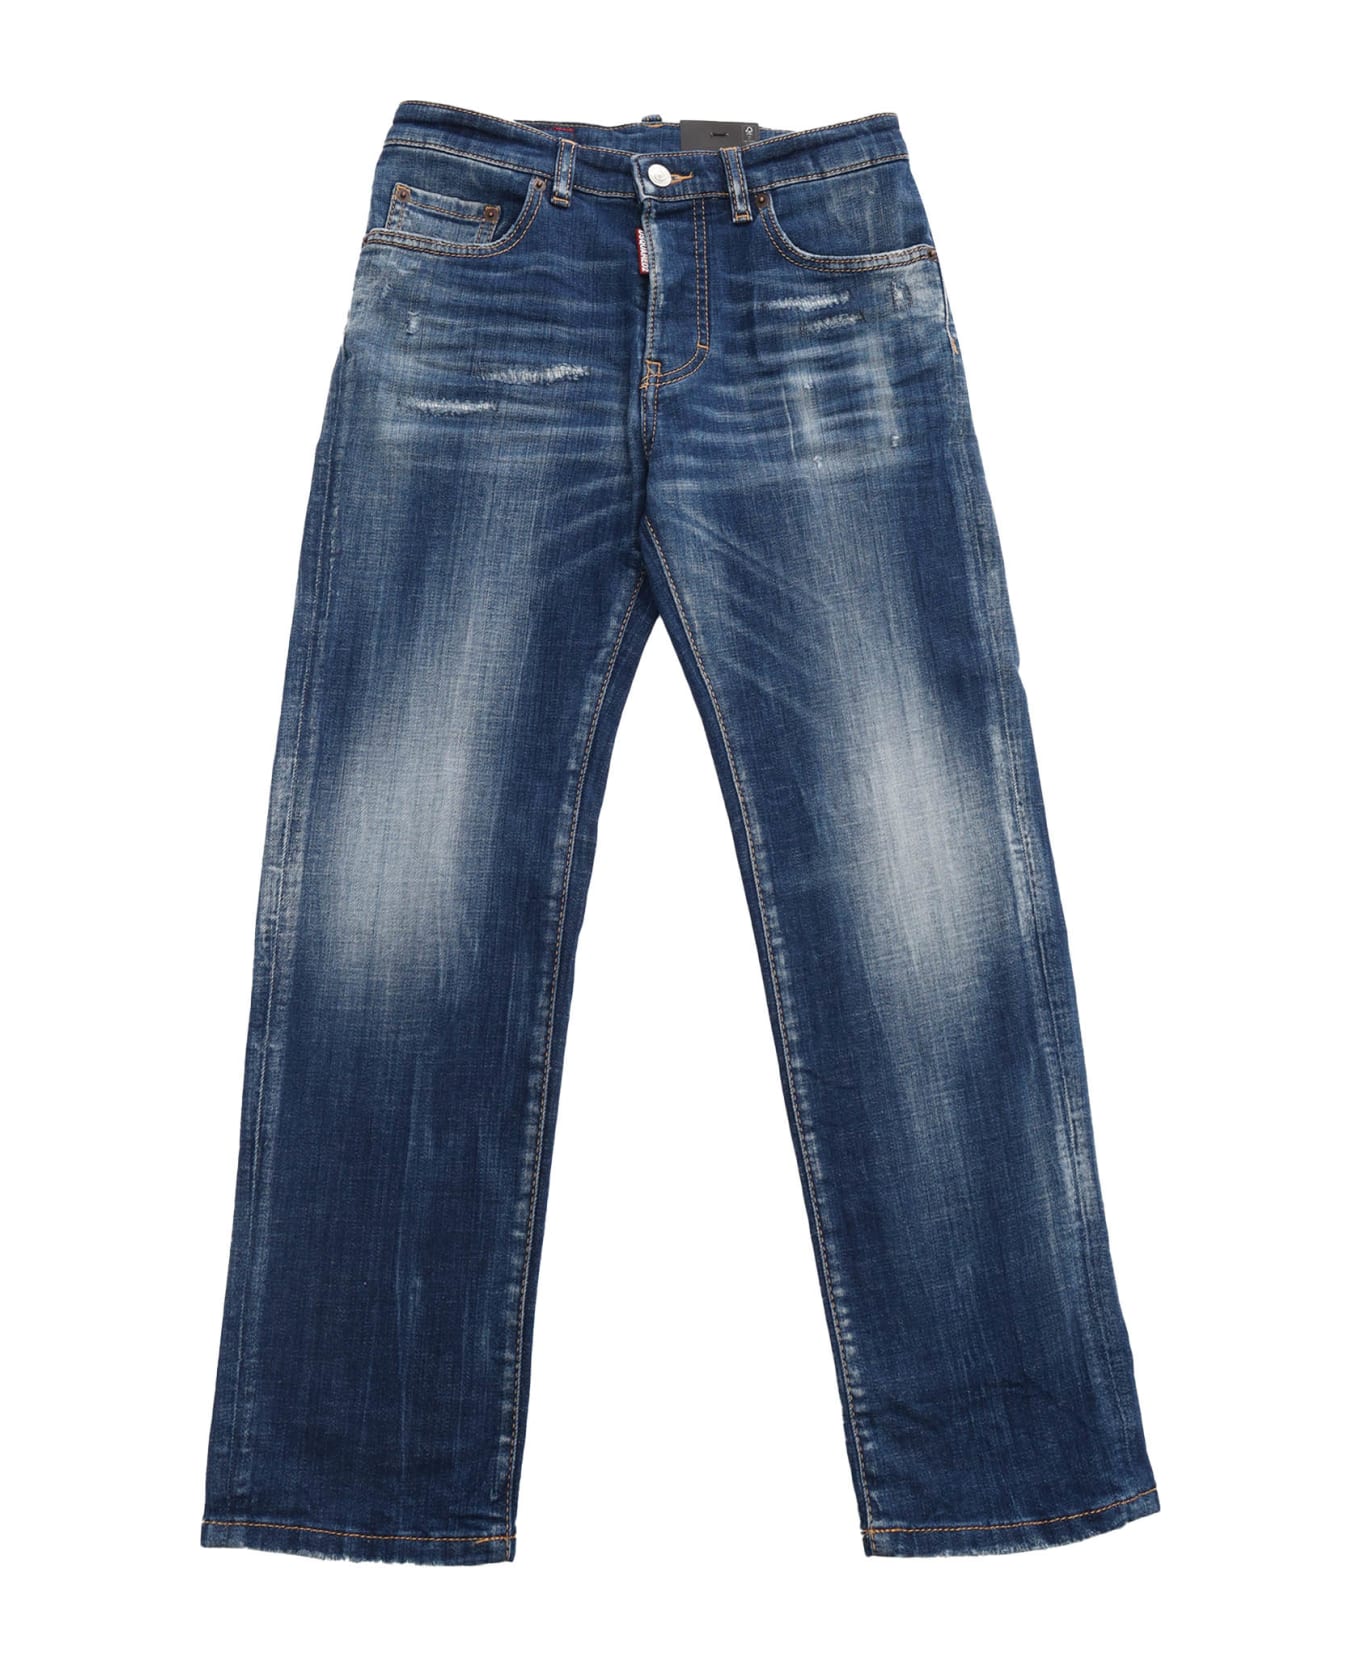 Dsquared2 Jeans - BLUE ボトムス